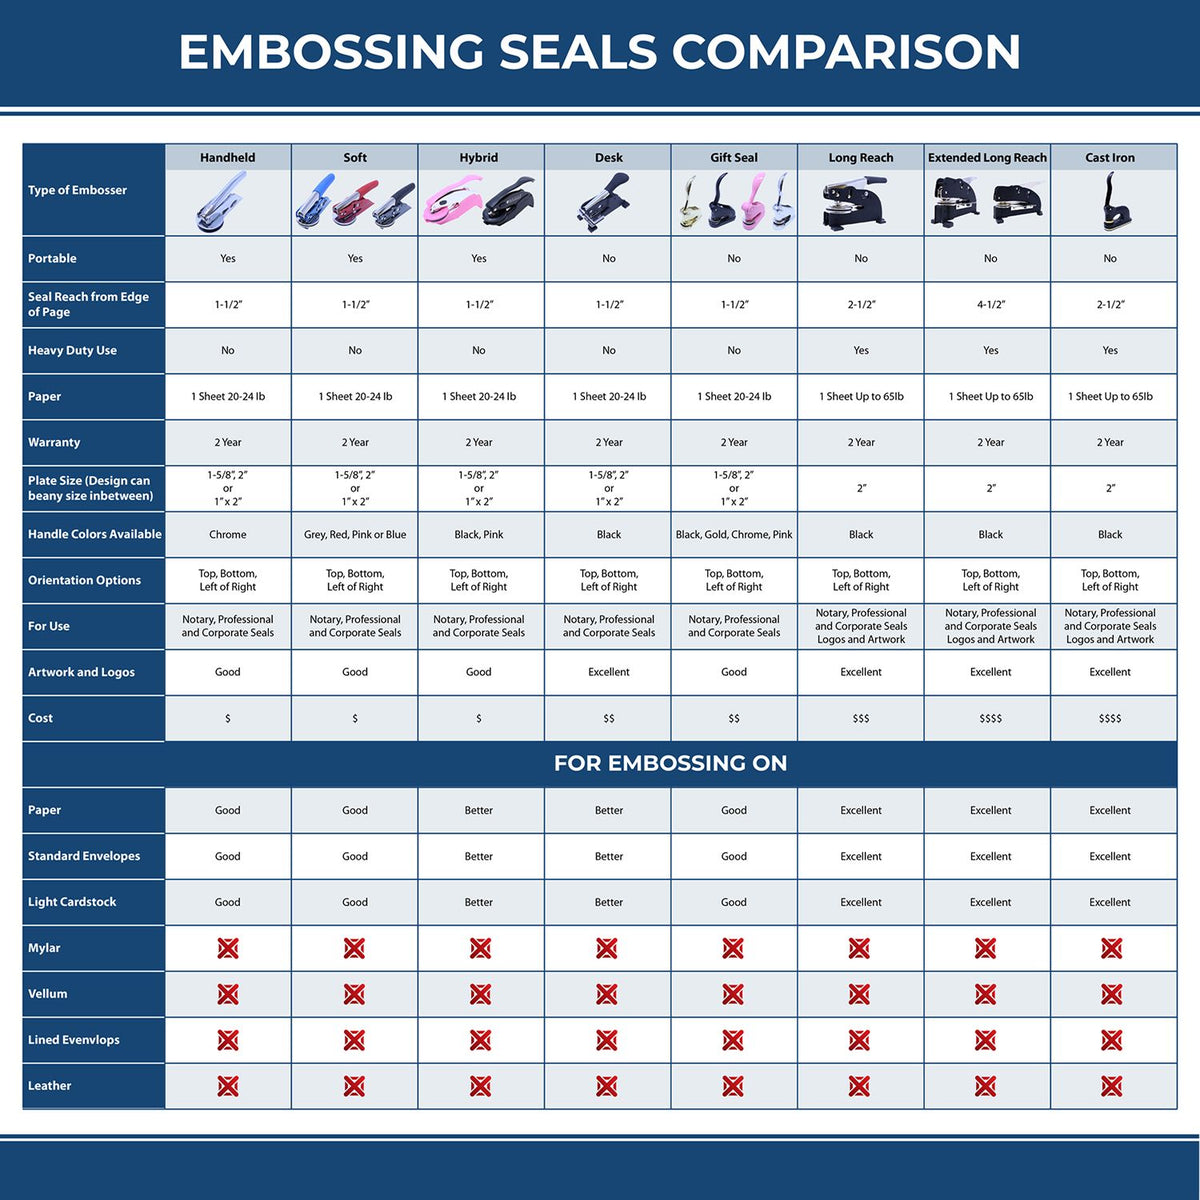 A comparison chart for the different types of mount models available for the Soft Pocket Alabama Landscape Architect Embosser.